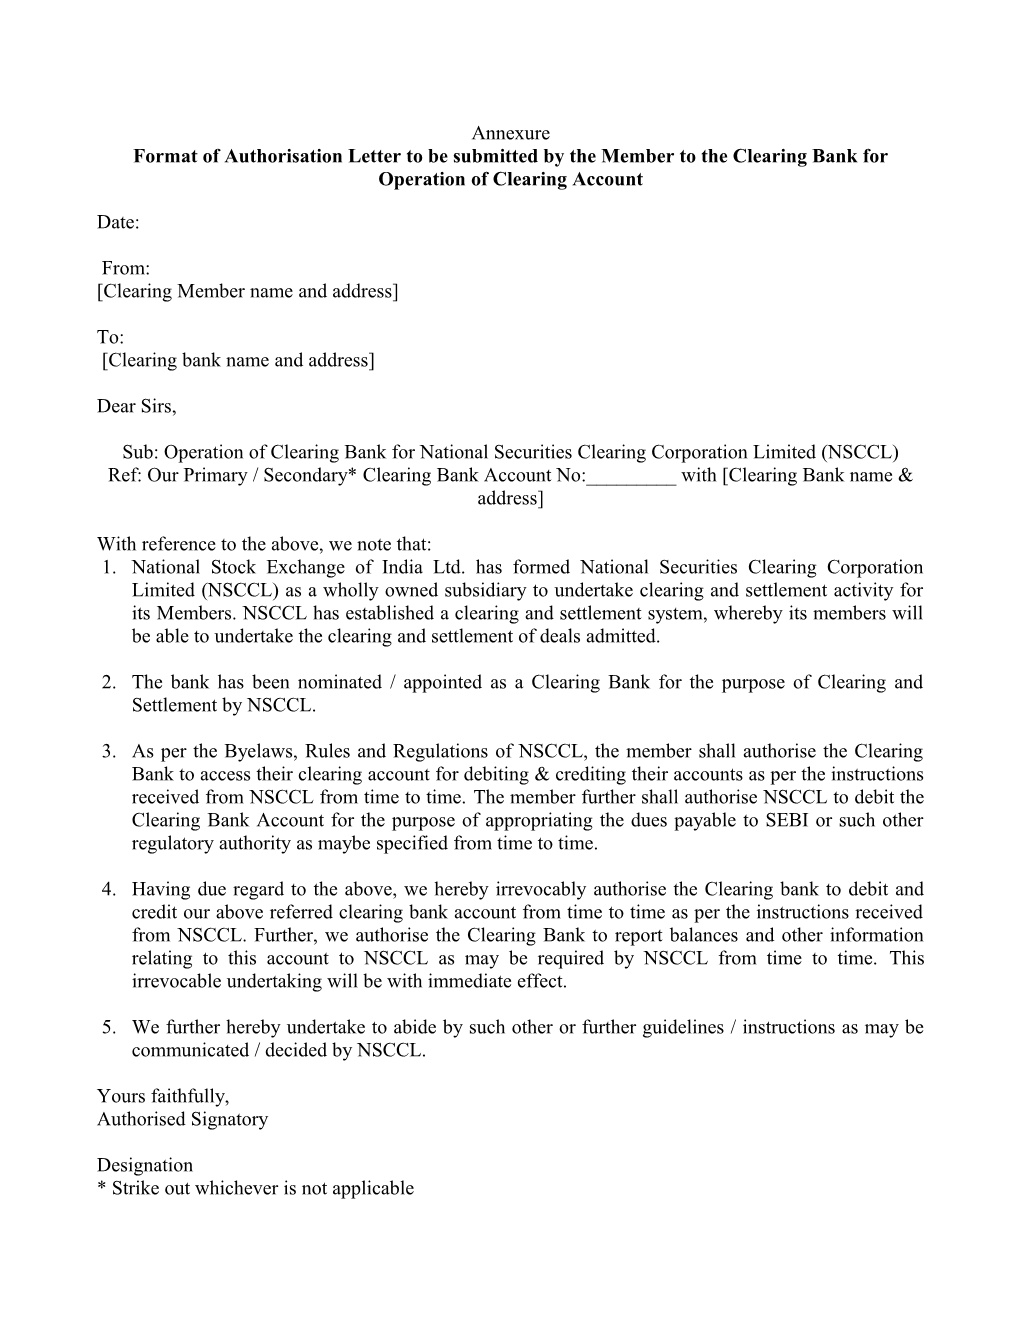 Format of Authorisation Letter to Be Submitted by the Member to the Clearing Bank For